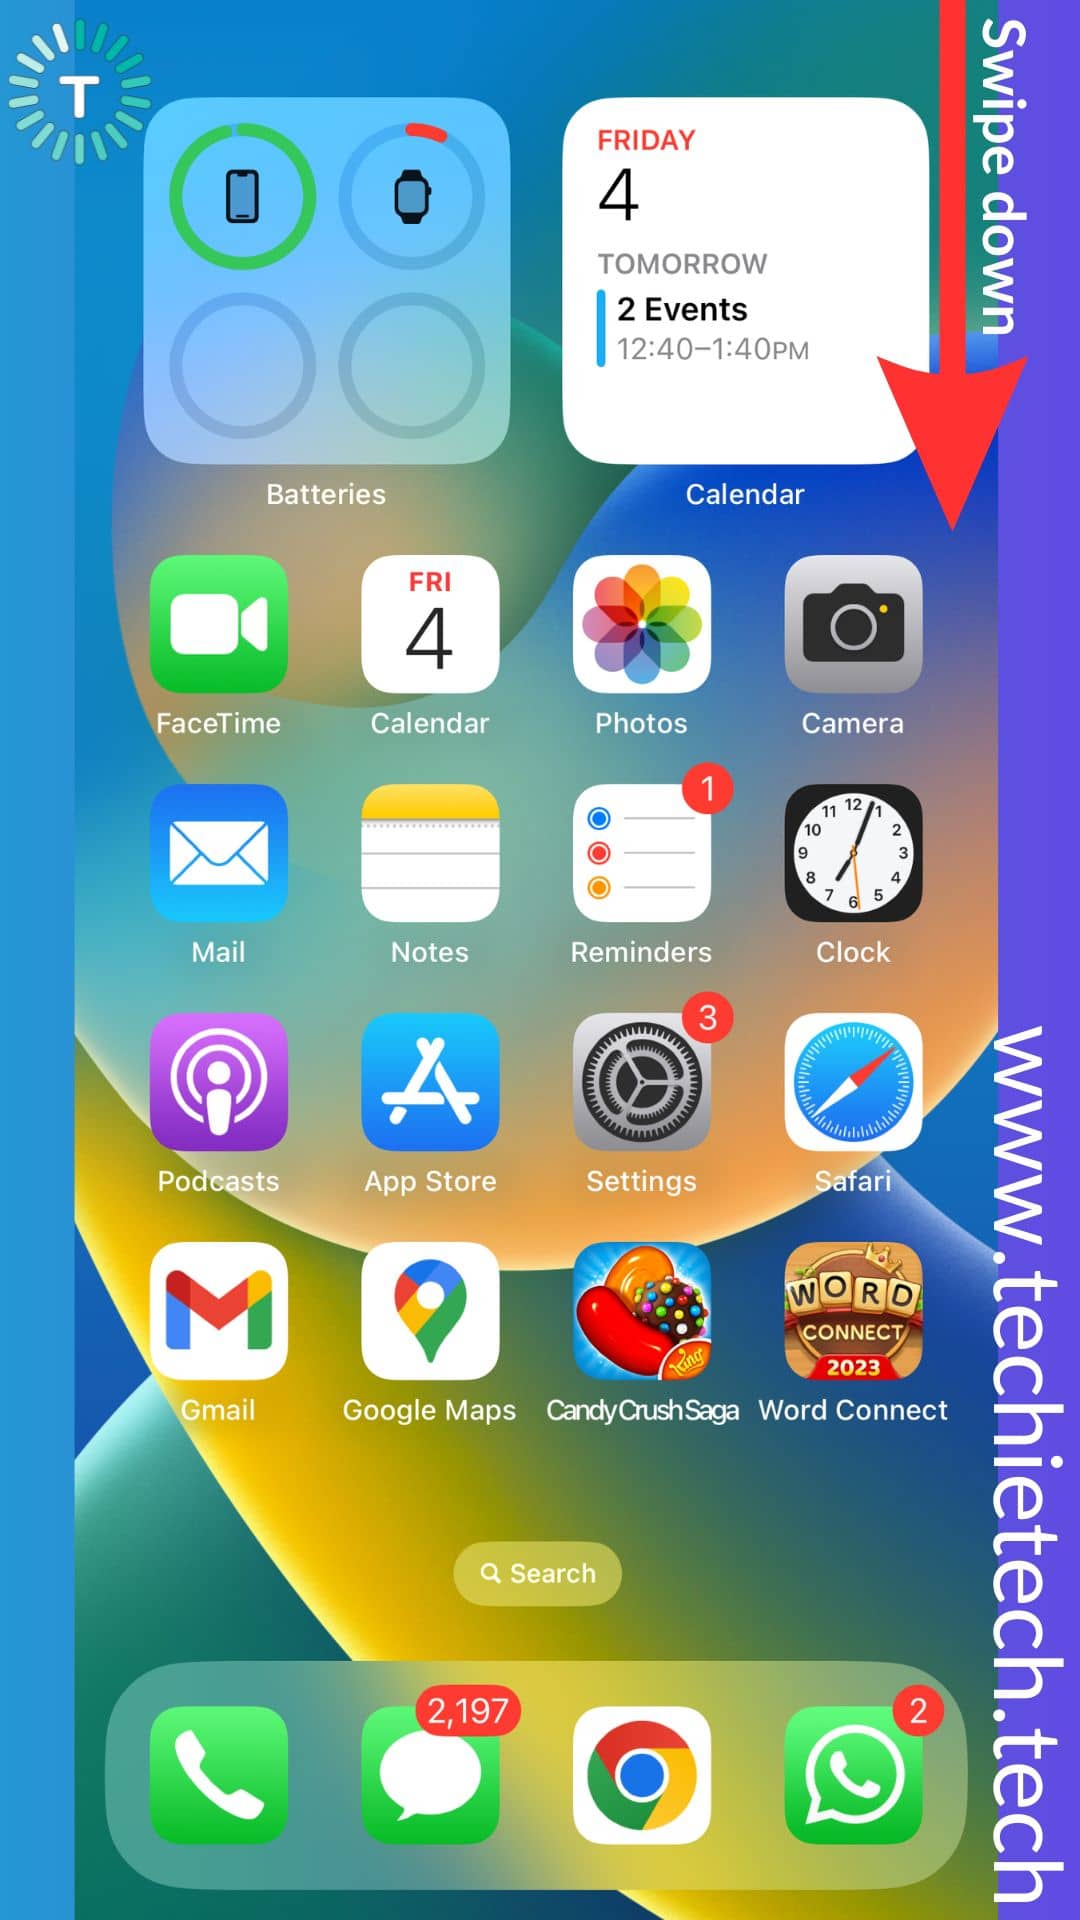 Swipe down on top right corner of the iPhone's screen